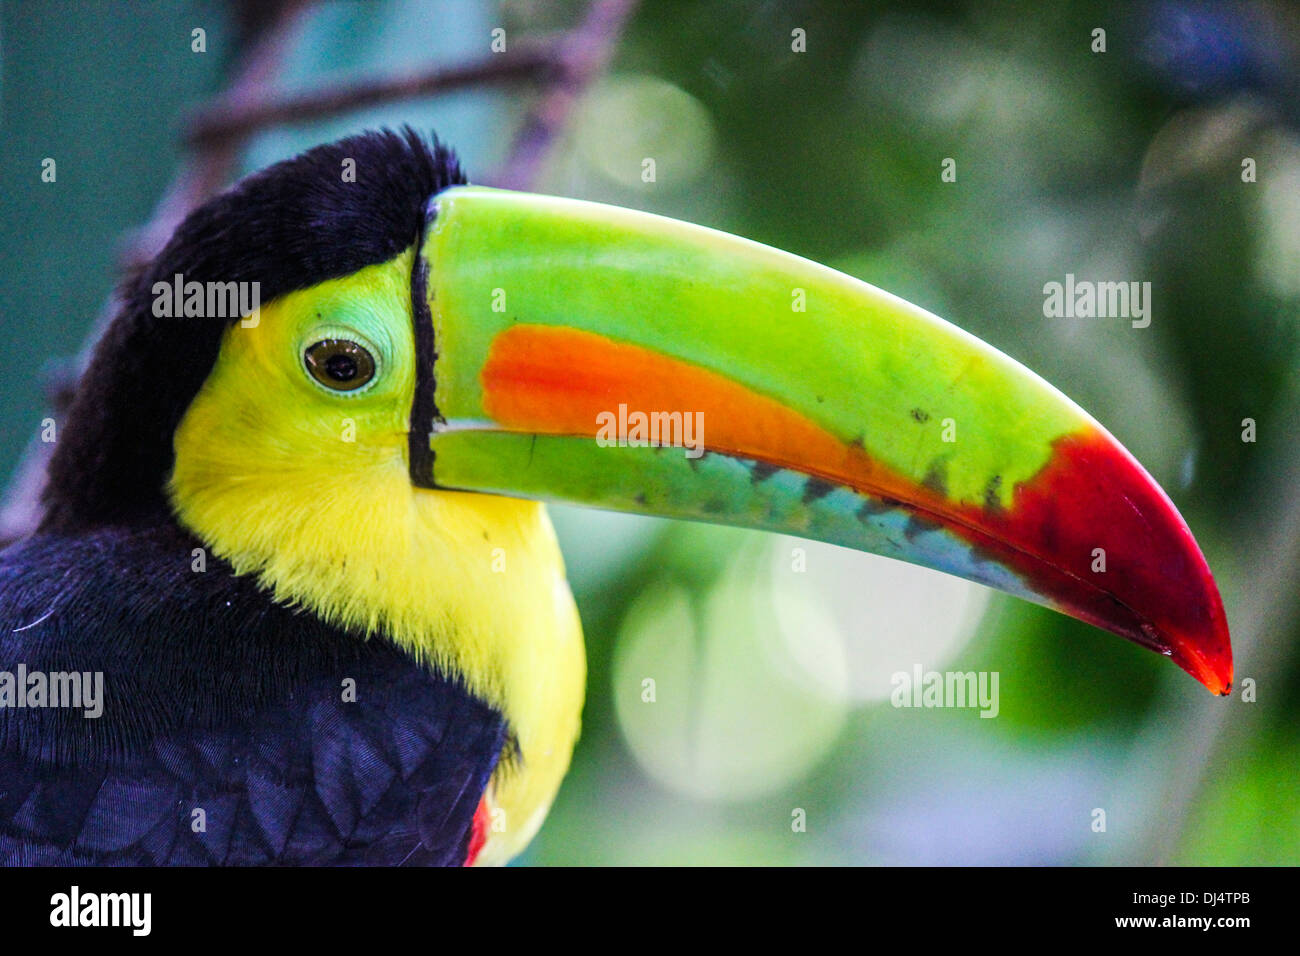 Close-up of a keel-billed toucan (Ramphastos sulfuratus) Stock Photo